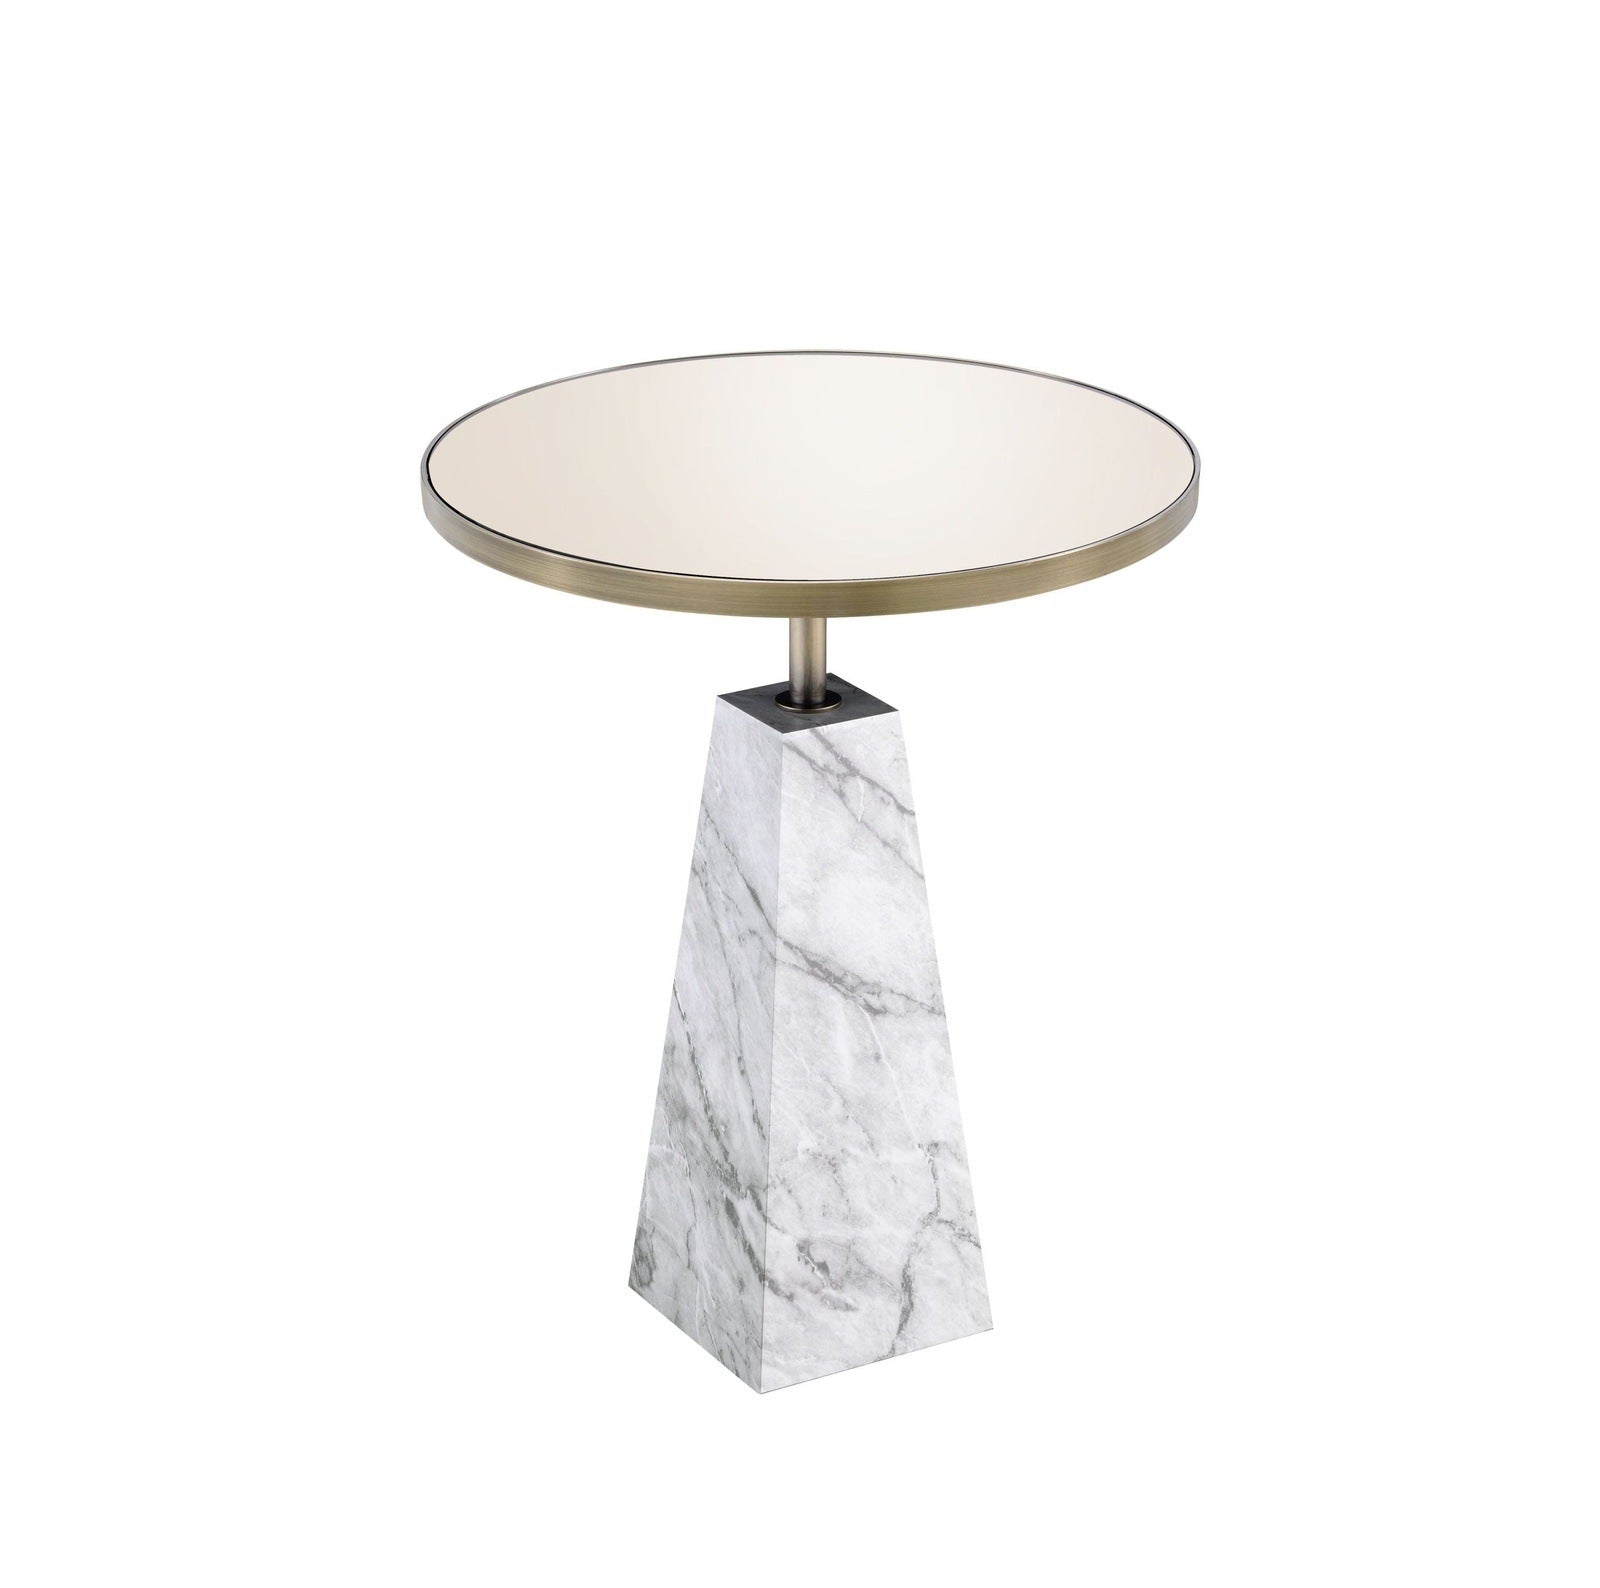 ACME Galilahi Side Table, Mirrored, Faux Marble & Antique Gold 97129